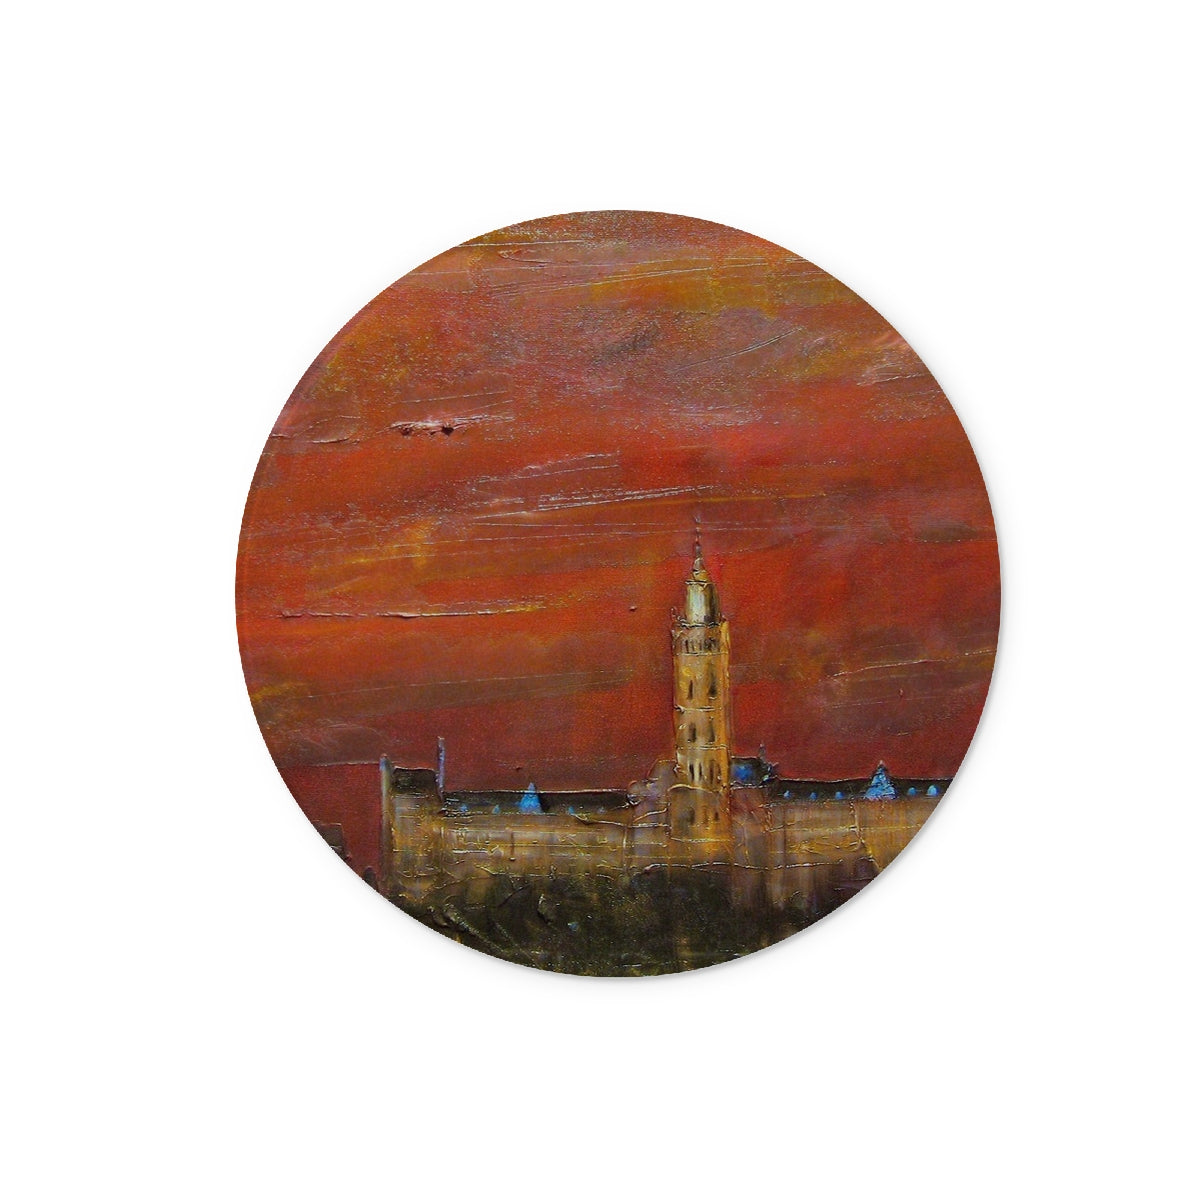 Glasgow University Dusk Art Gifts Glass Chopping Board-Glass Chopping Boards-Edinburgh & Glasgow Art Gallery-12" Round-Paintings, Prints, Homeware, Art Gifts From Scotland By Scottish Artist Kevin Hunter